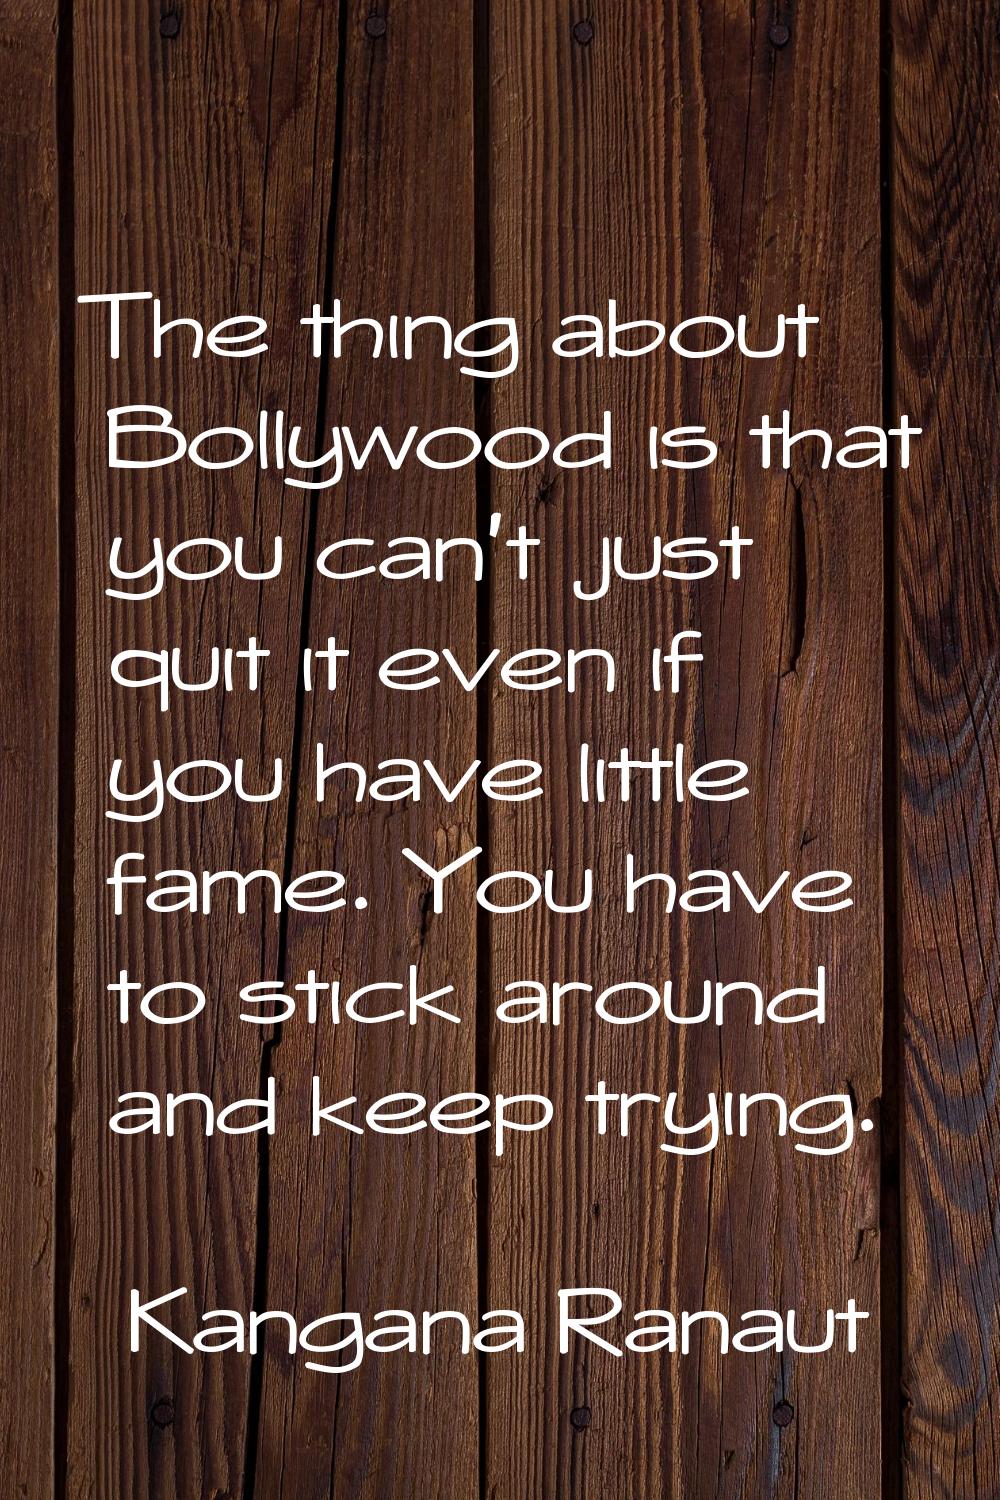 The thing about Bollywood is that you can't just quit it even if you have little fame. You have to 